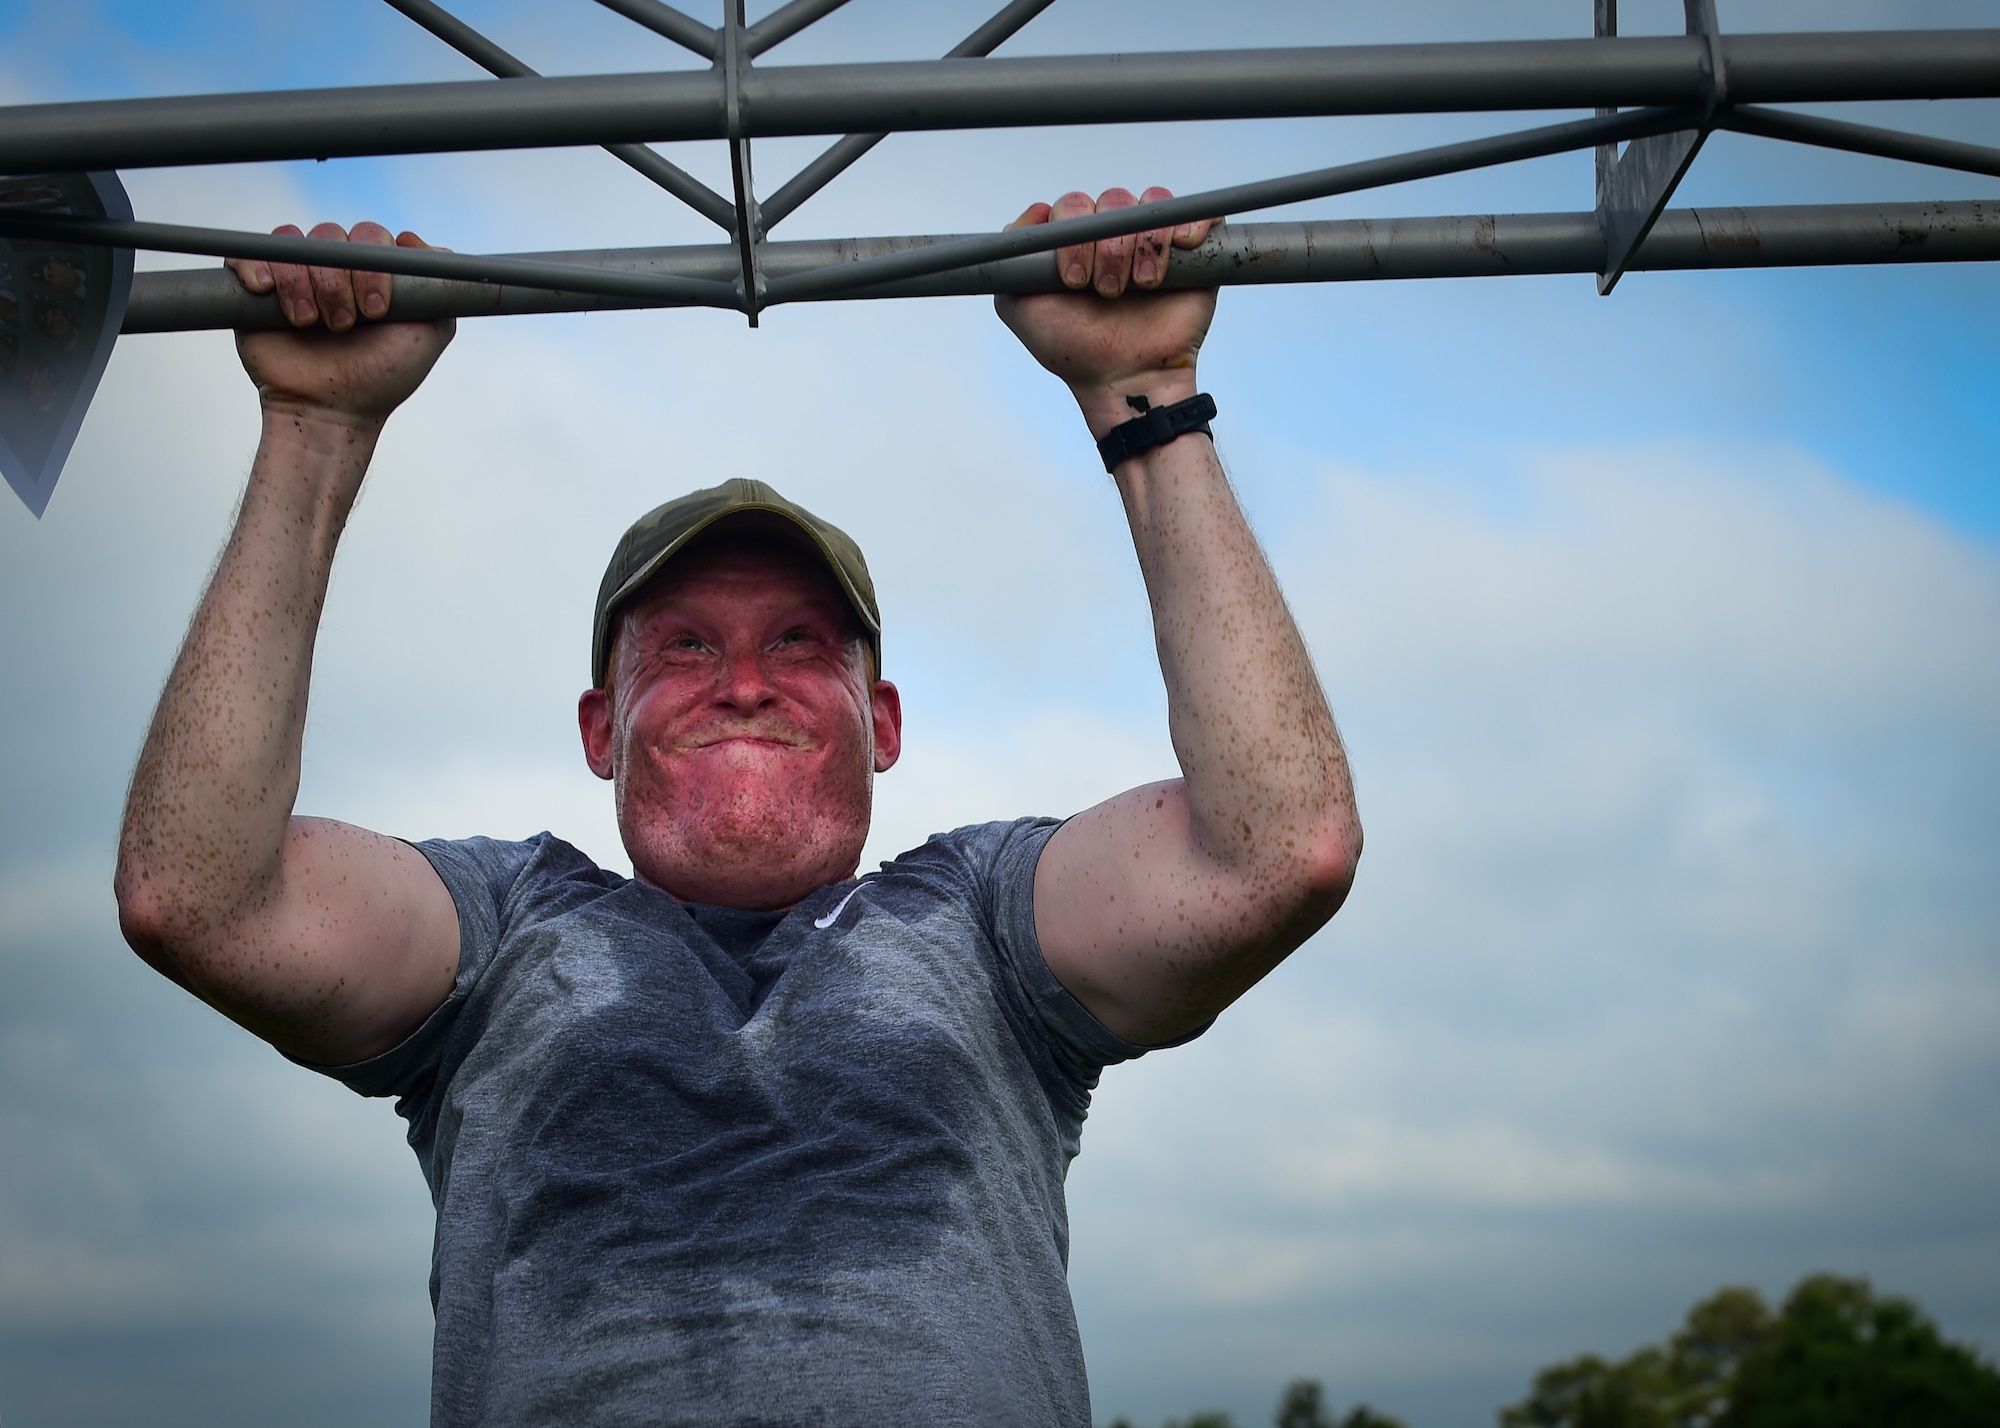 U.S. Air Force Staff Sgt. Holden, assigned to the 30th Intelligence Squadron, does a pull-up during a Memorial Day Murph and Pararescue Workout event at Joint Base Langley-Eustis, Va., May 29, 2017. Participants who participated in the Pararescue Workout ran a total of two miles, performed a total of 100 pullups, 400 burpees, 300 squats, 100 sit-ups and 400-meter tire flip. (U.S. Air Force photo/Staff Sgt. Areca T. Bell)(Last name withheld for security purposes)